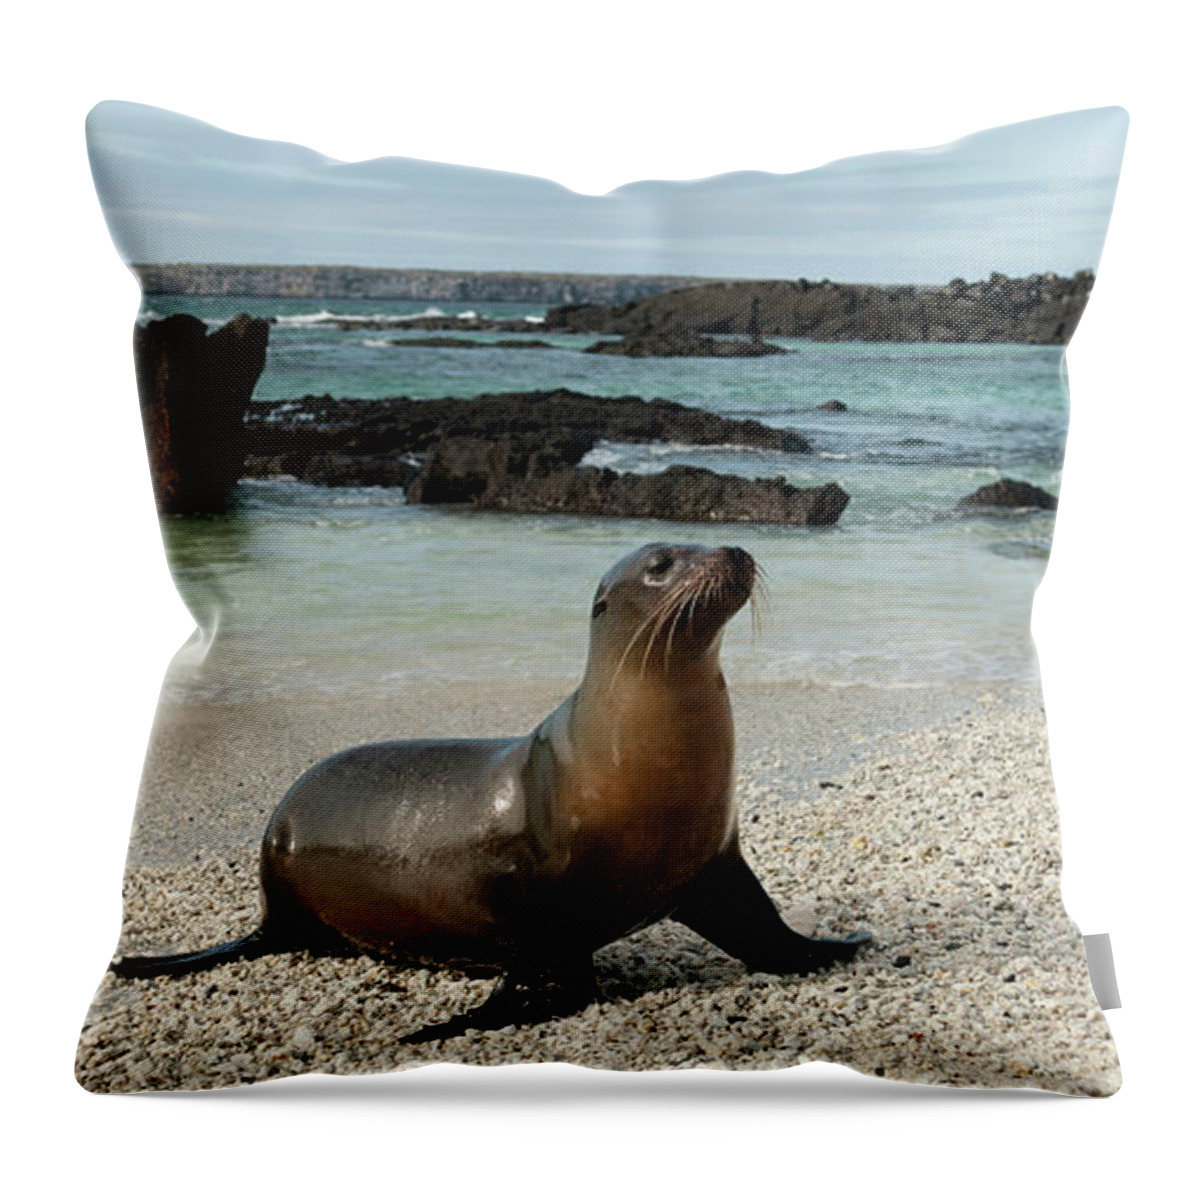 Scenics Throw Pillow featuring the photograph Sea Lion Otariidae On The Sand by Keith Levit / Design Pics